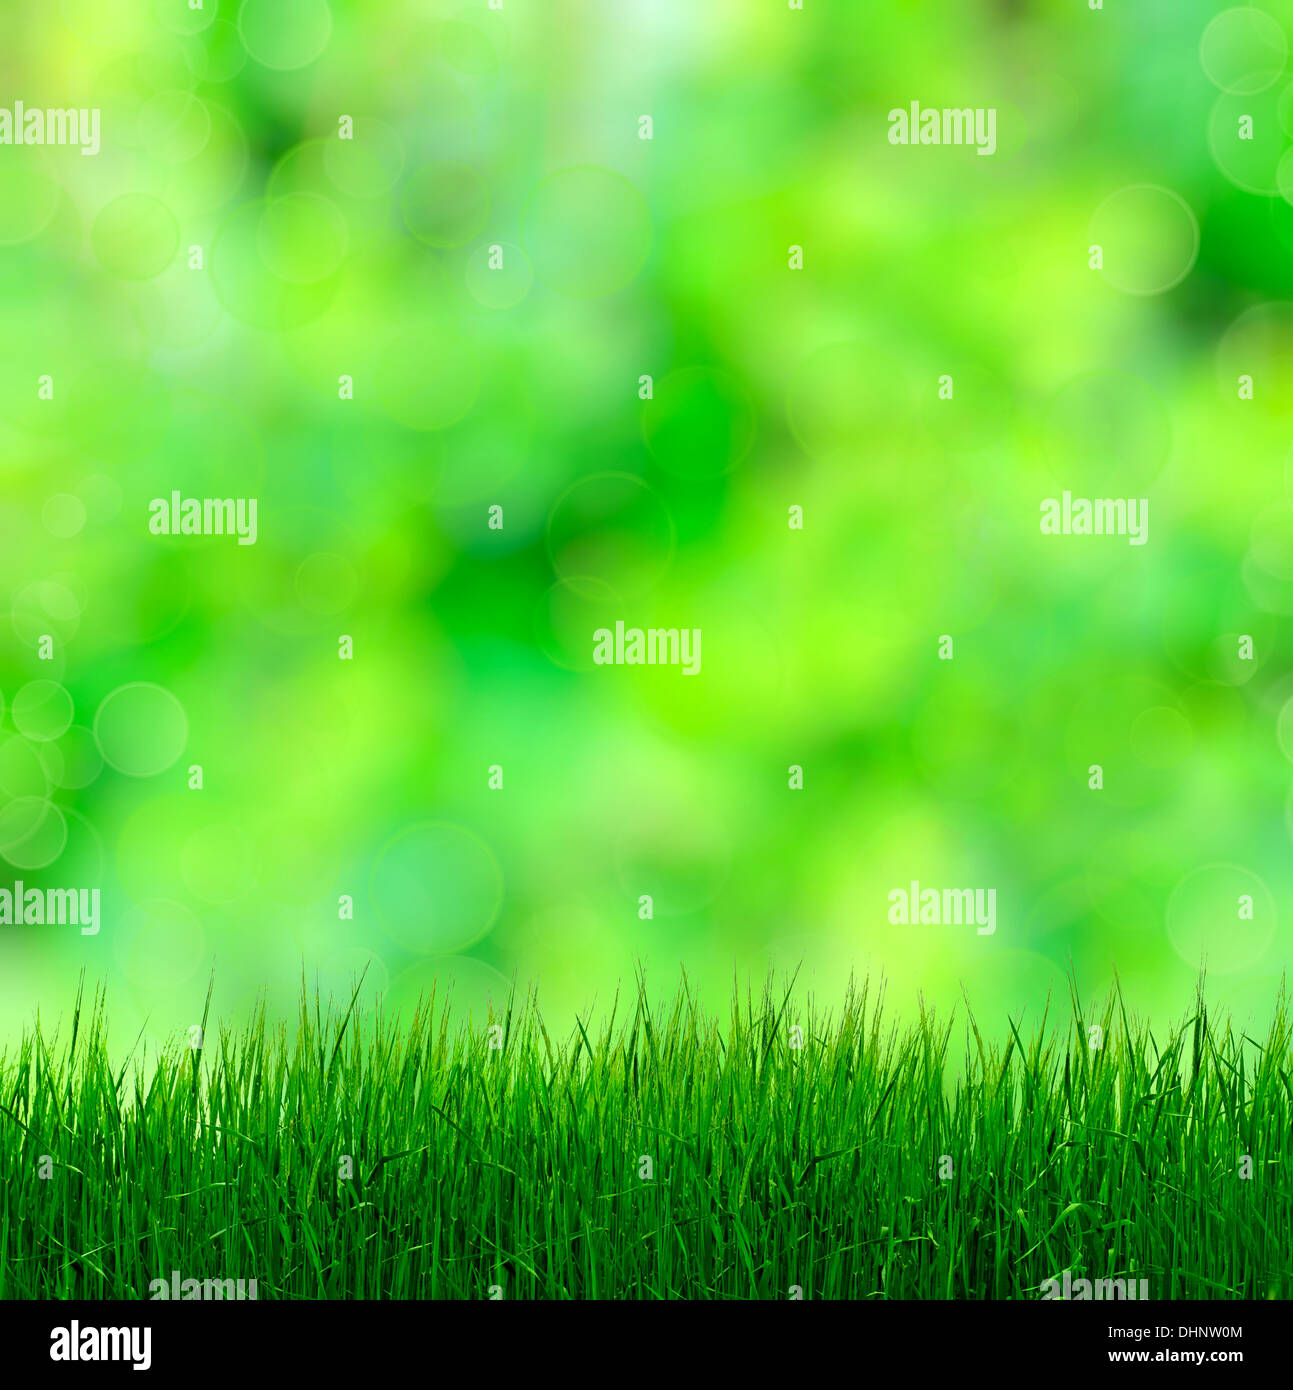 Grass On Blurred Background Stock Photo